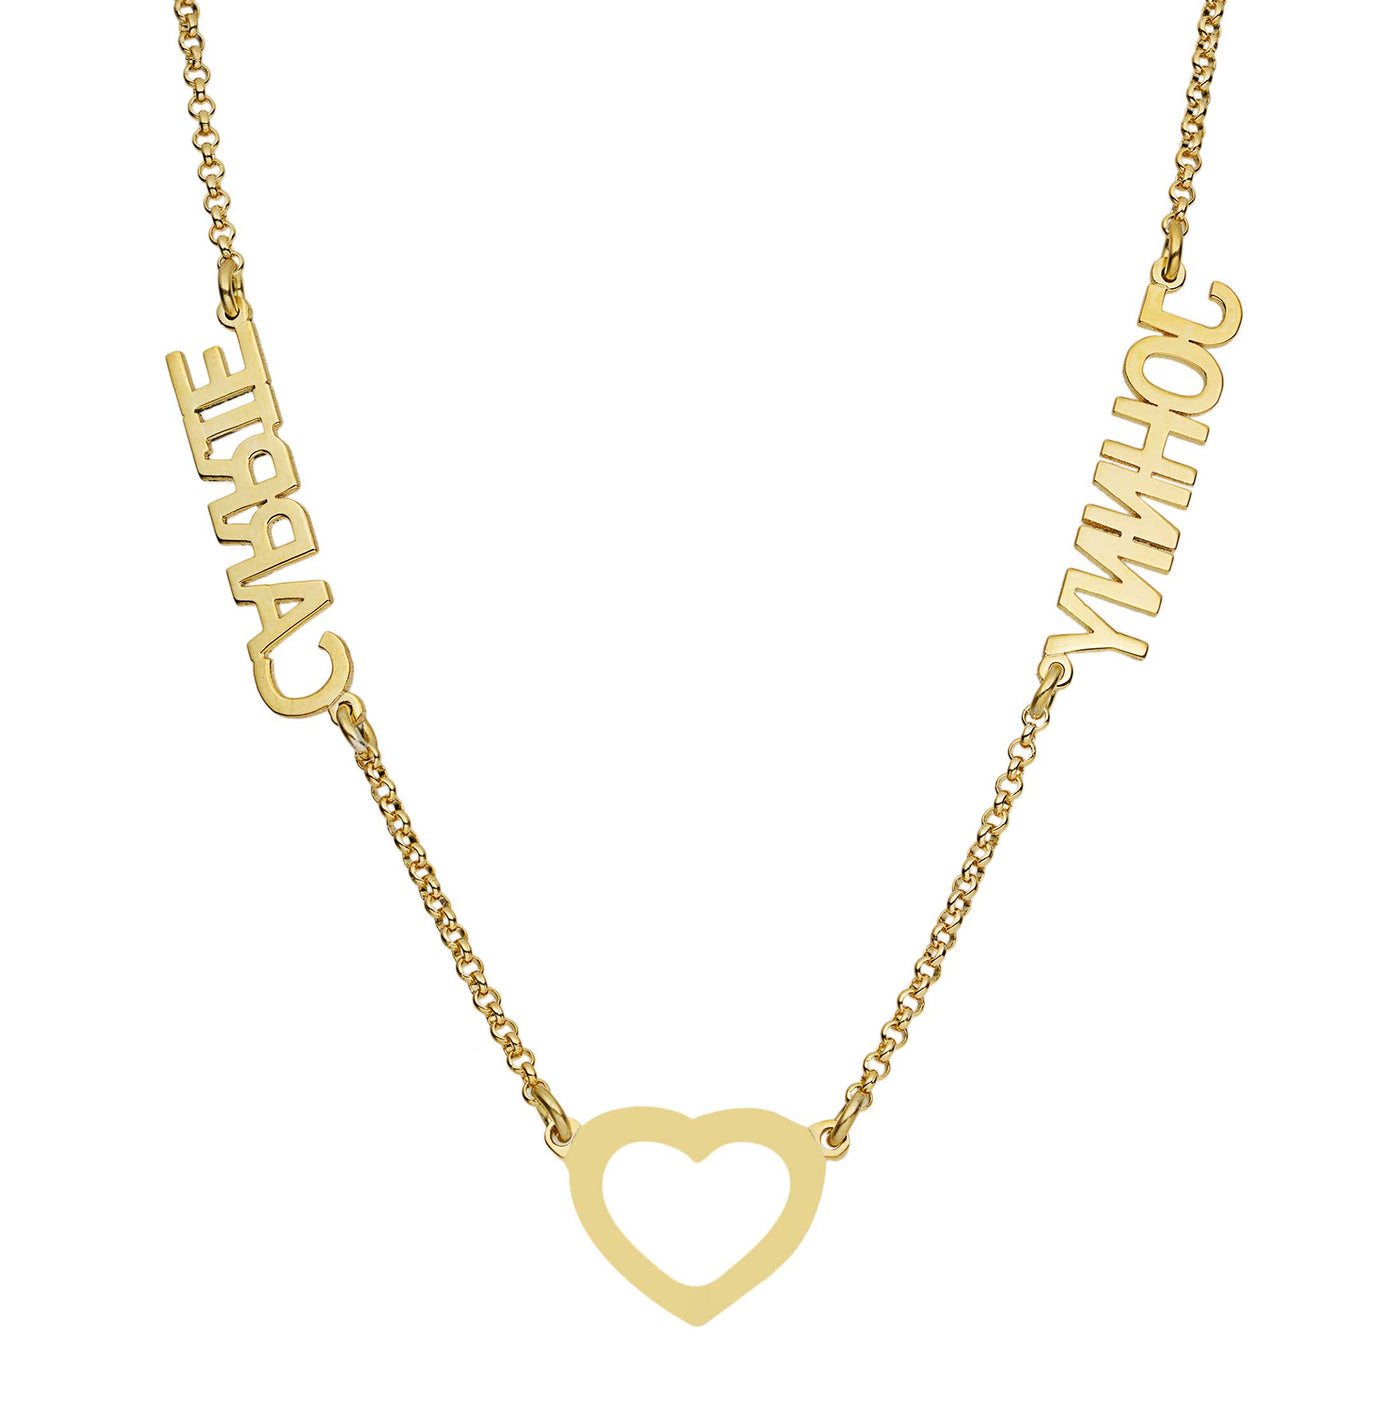 Ladies Diamond Heart Name Plate Necklace 14K Gold - Style 178